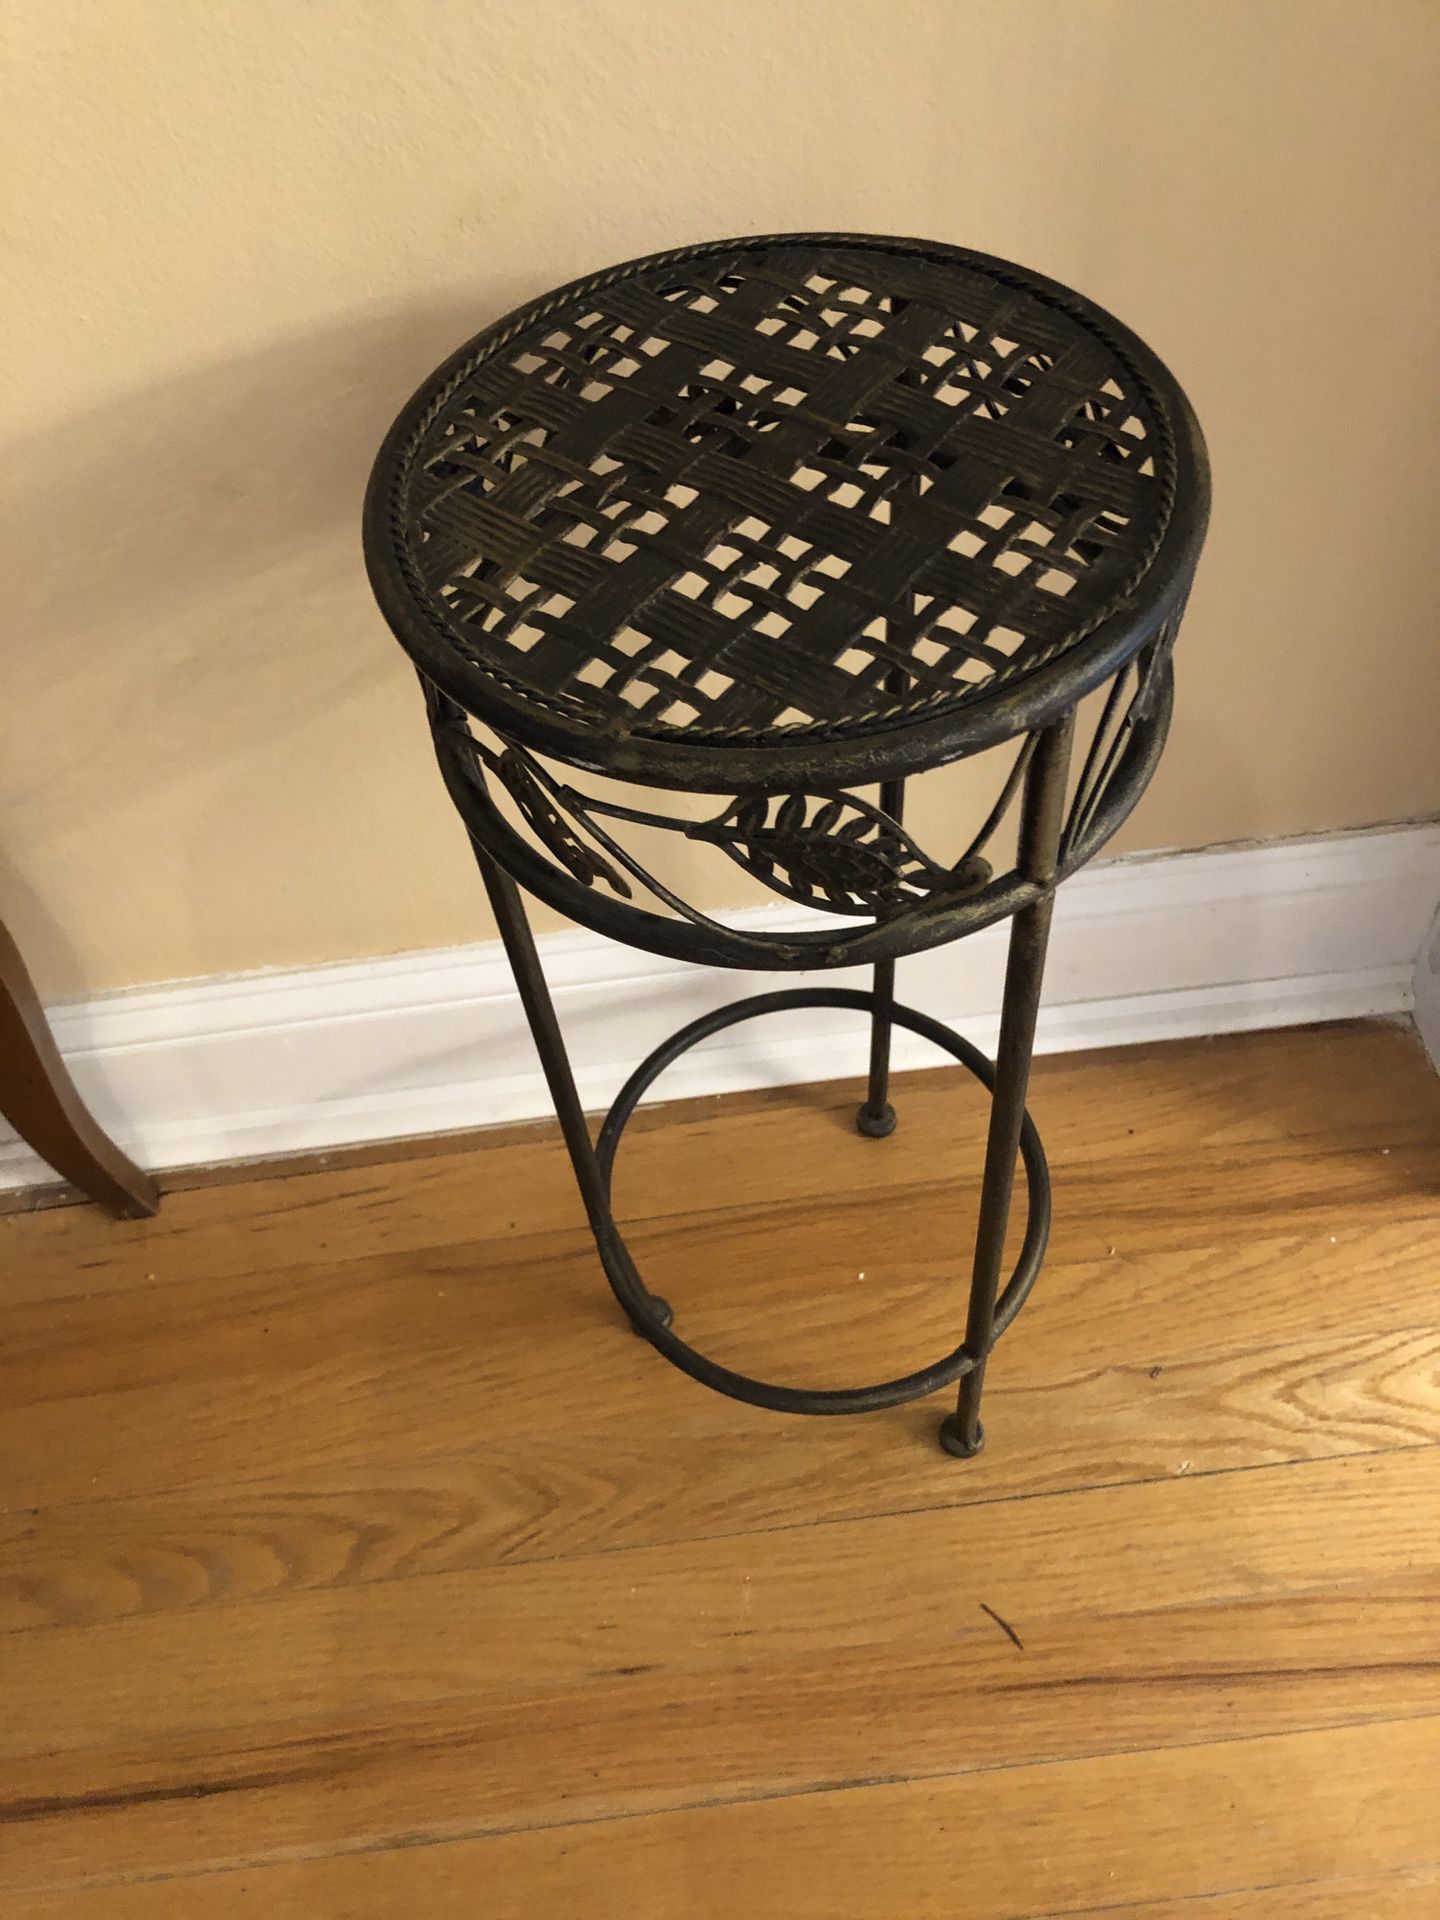 Very Nice Metal Plant Stand Or Statue 21” Tall And About 9” Wide 